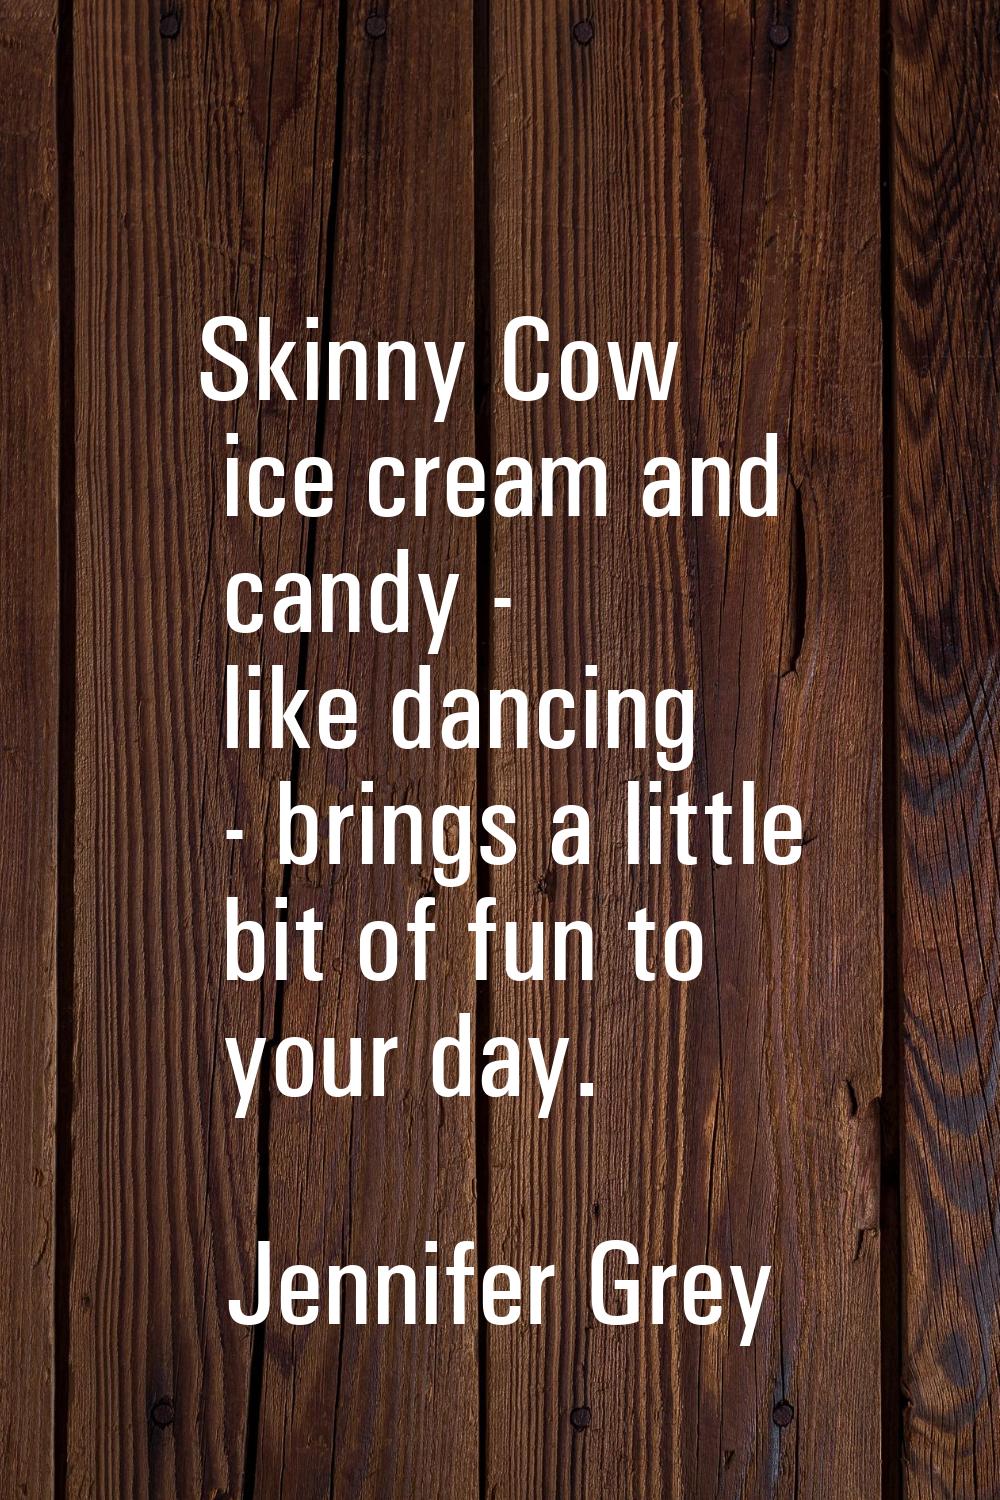 Skinny Cow ice cream and candy - like dancing - brings a little bit of fun to your day.